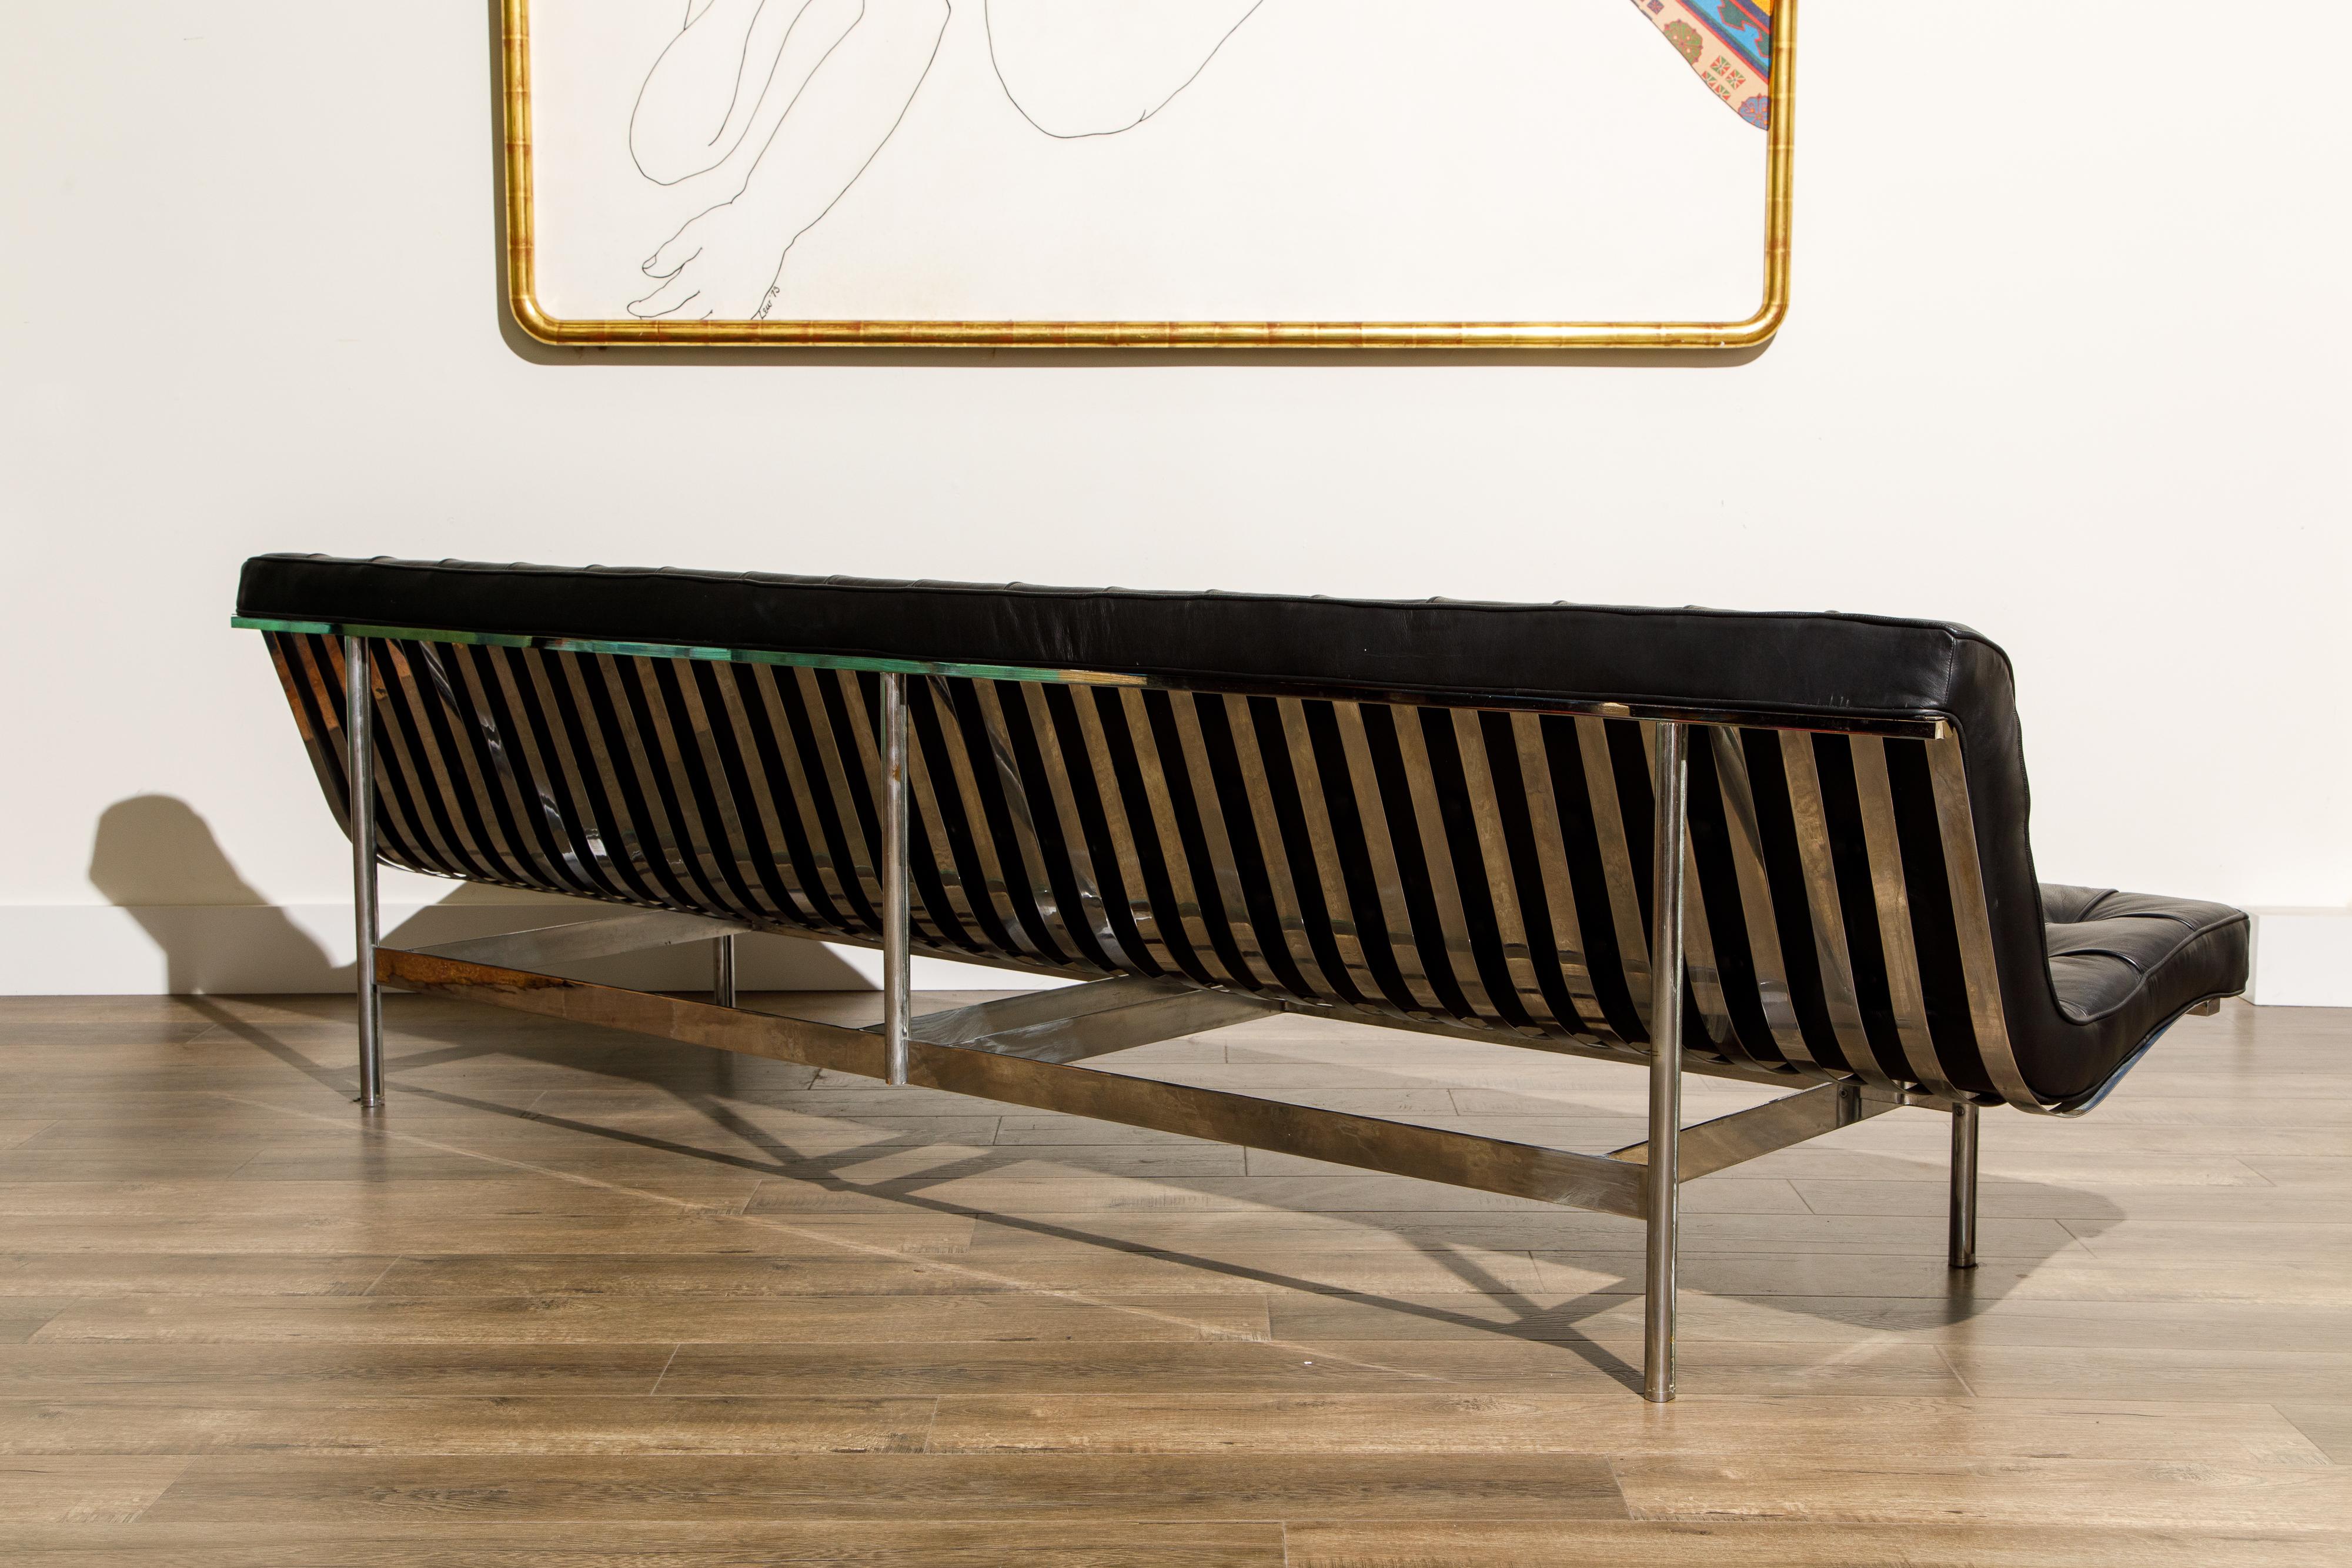 Steel Four-Seat Sofa by Katavolos, Littell and Kelley for Laverne International, 1950s